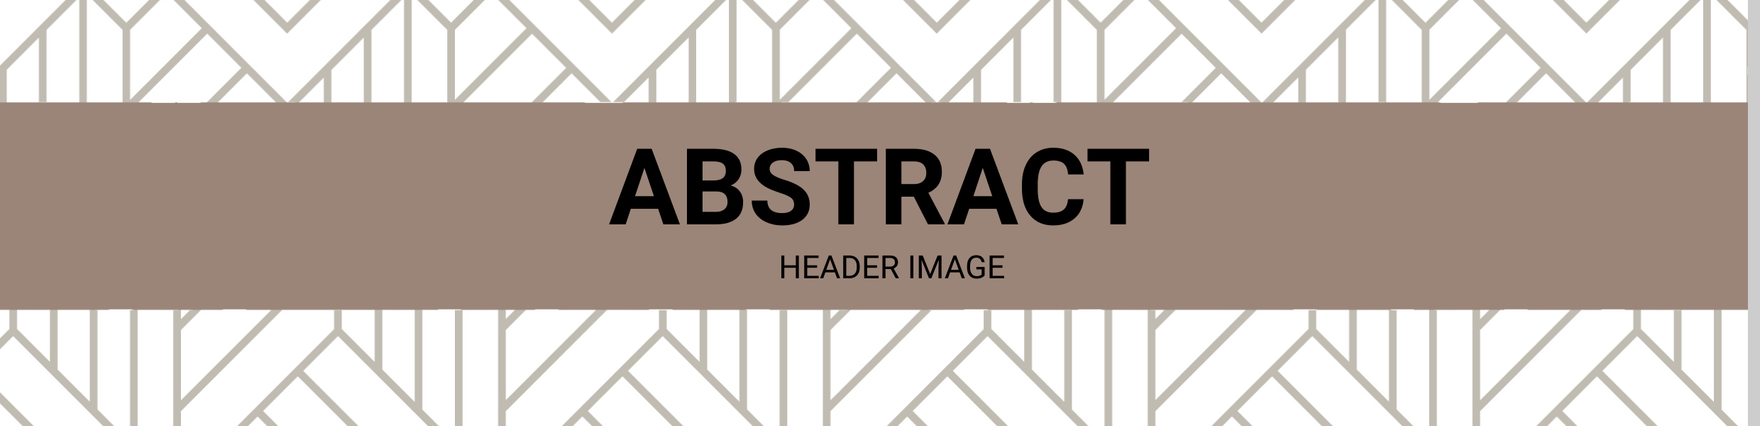 Abstract Header Image Template